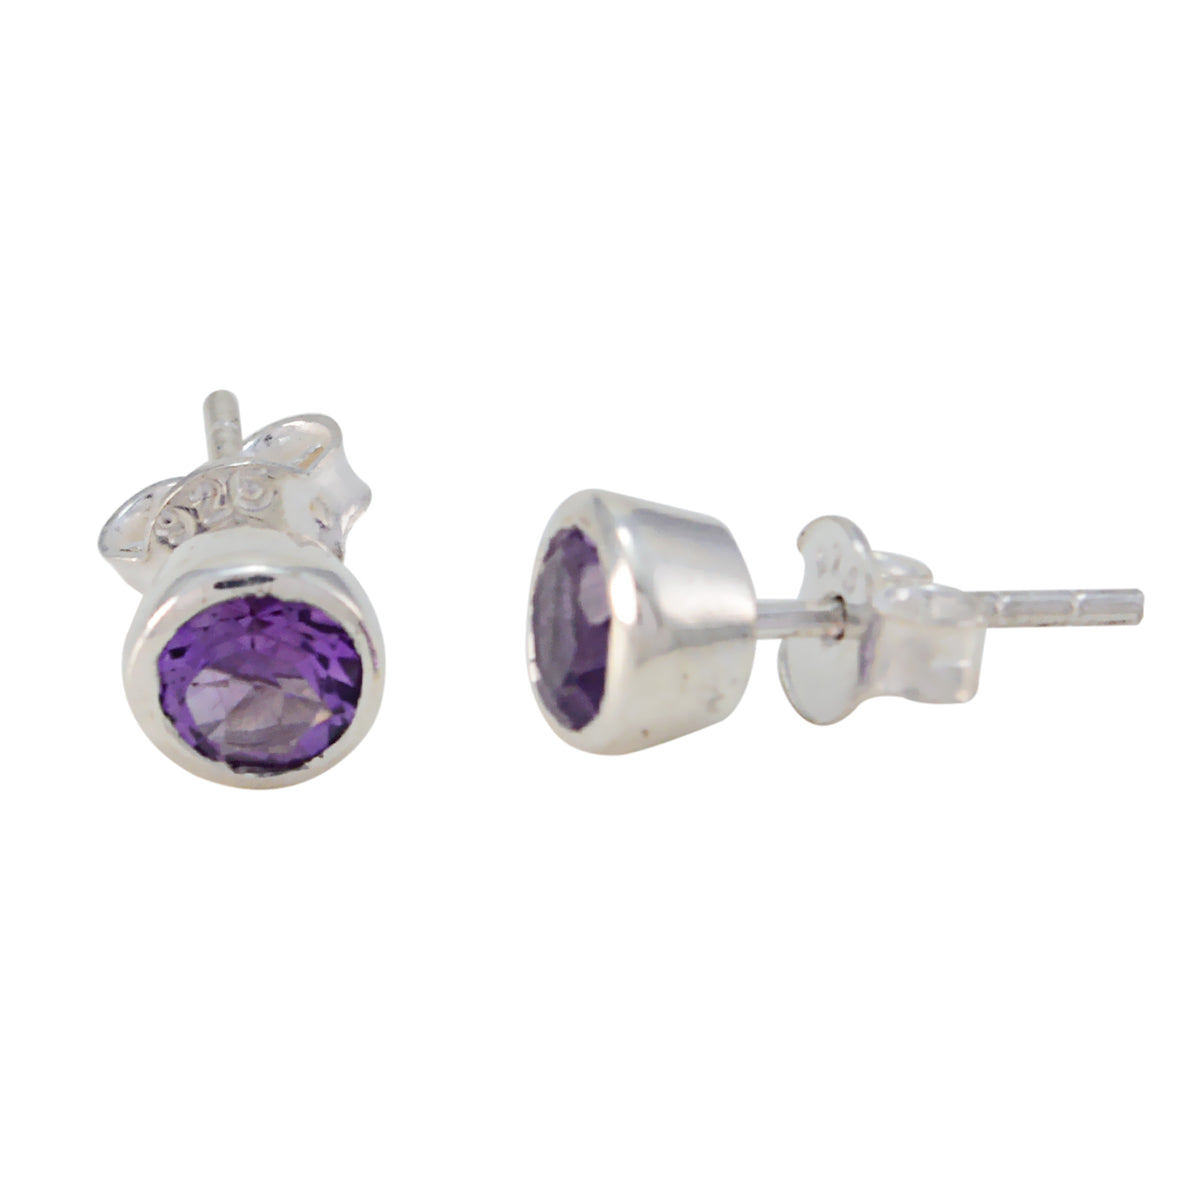 Riyo Real Gemstones round Faceted Purple Amethyst Silver Earring gift for labour day